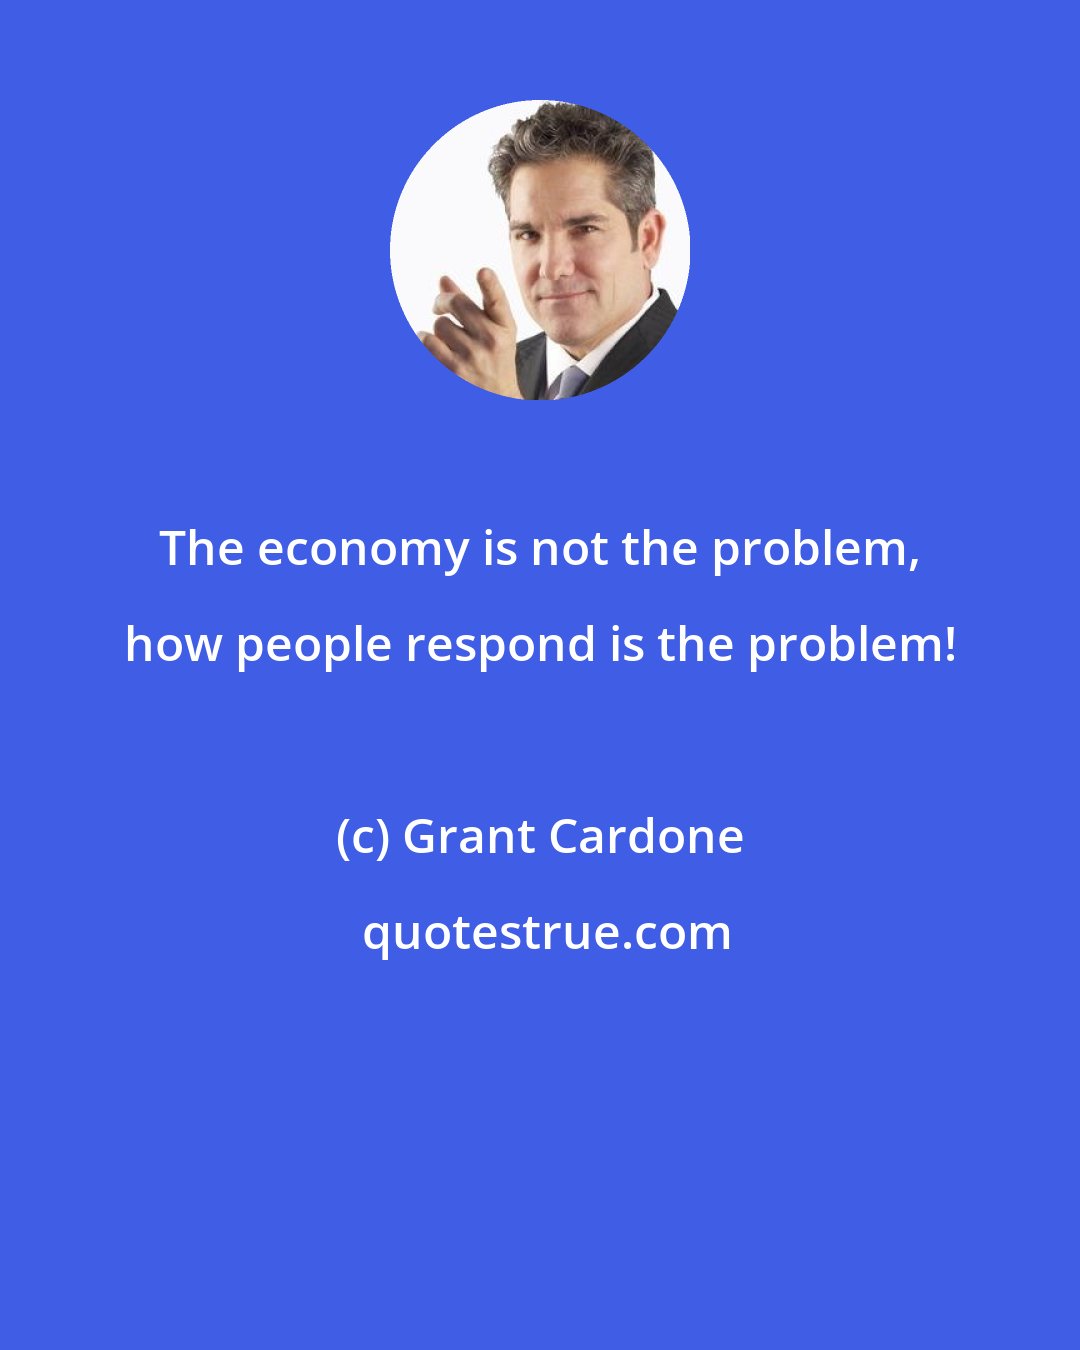 Grant Cardone: The economy is not the problem, how people respond is the problem!